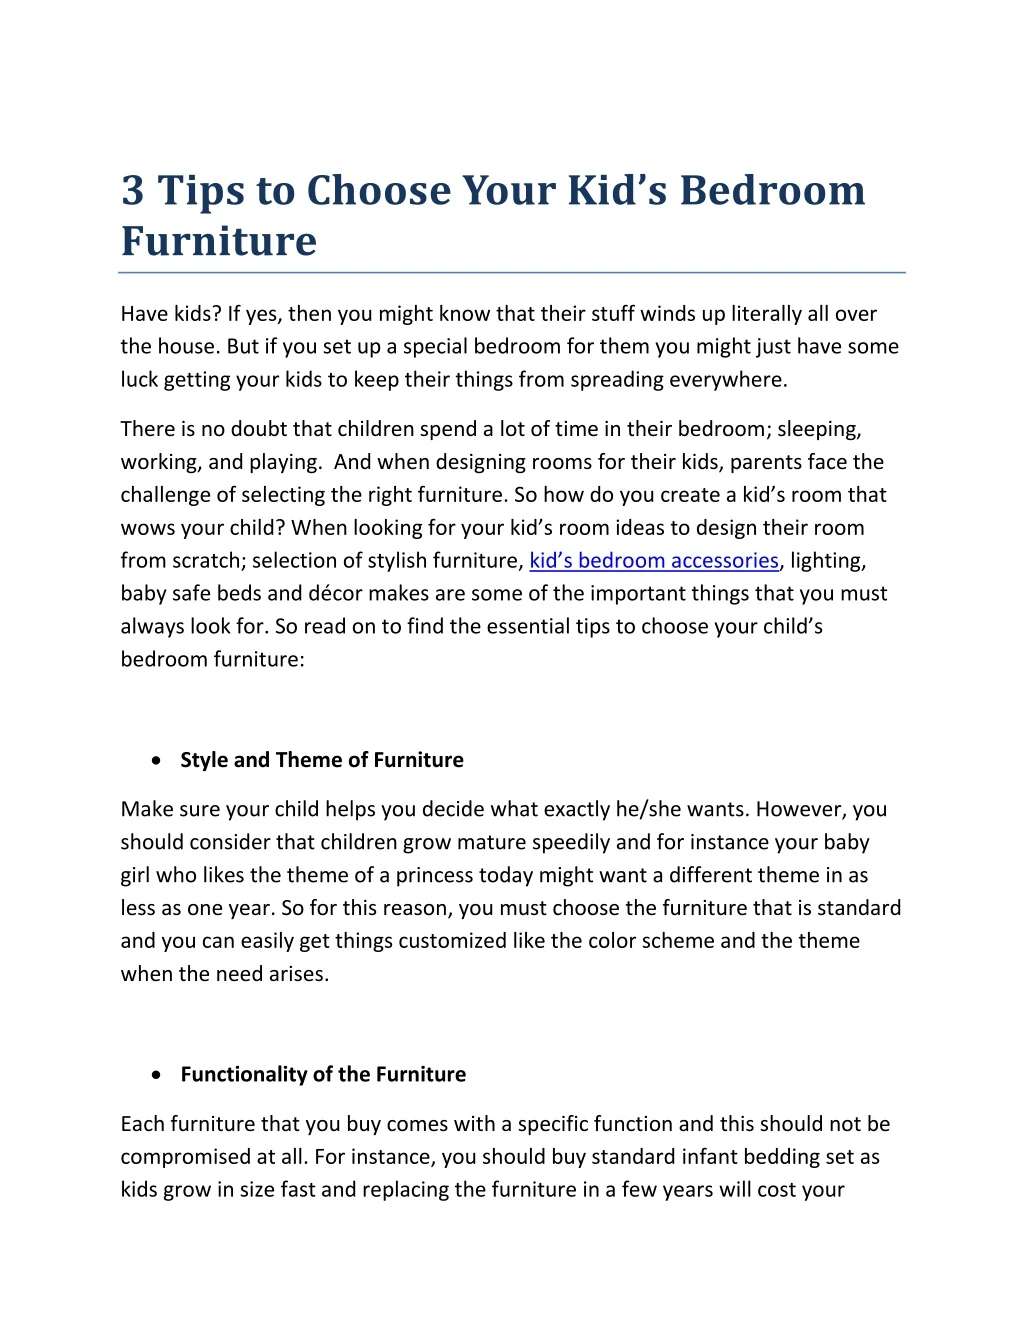 3 tips to choose your kid s bedroom furniture